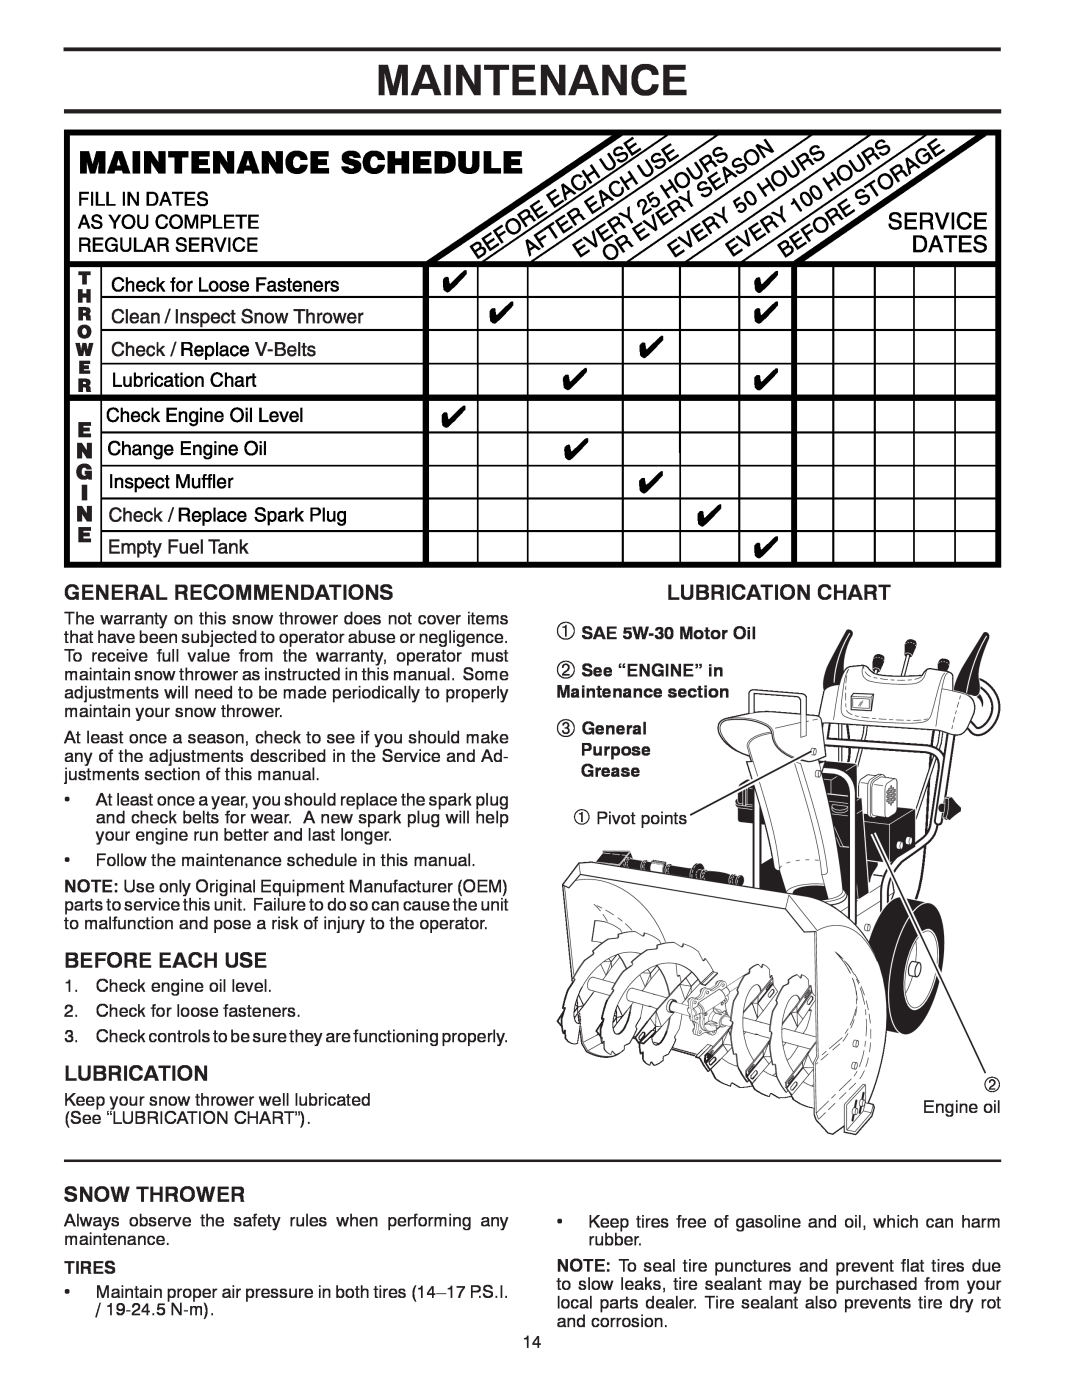 Poulan XT1053ES Maintenance, General Recommendations, Before Each Use, Snow Thrower, Lubrication Chart, Purpose Grease 